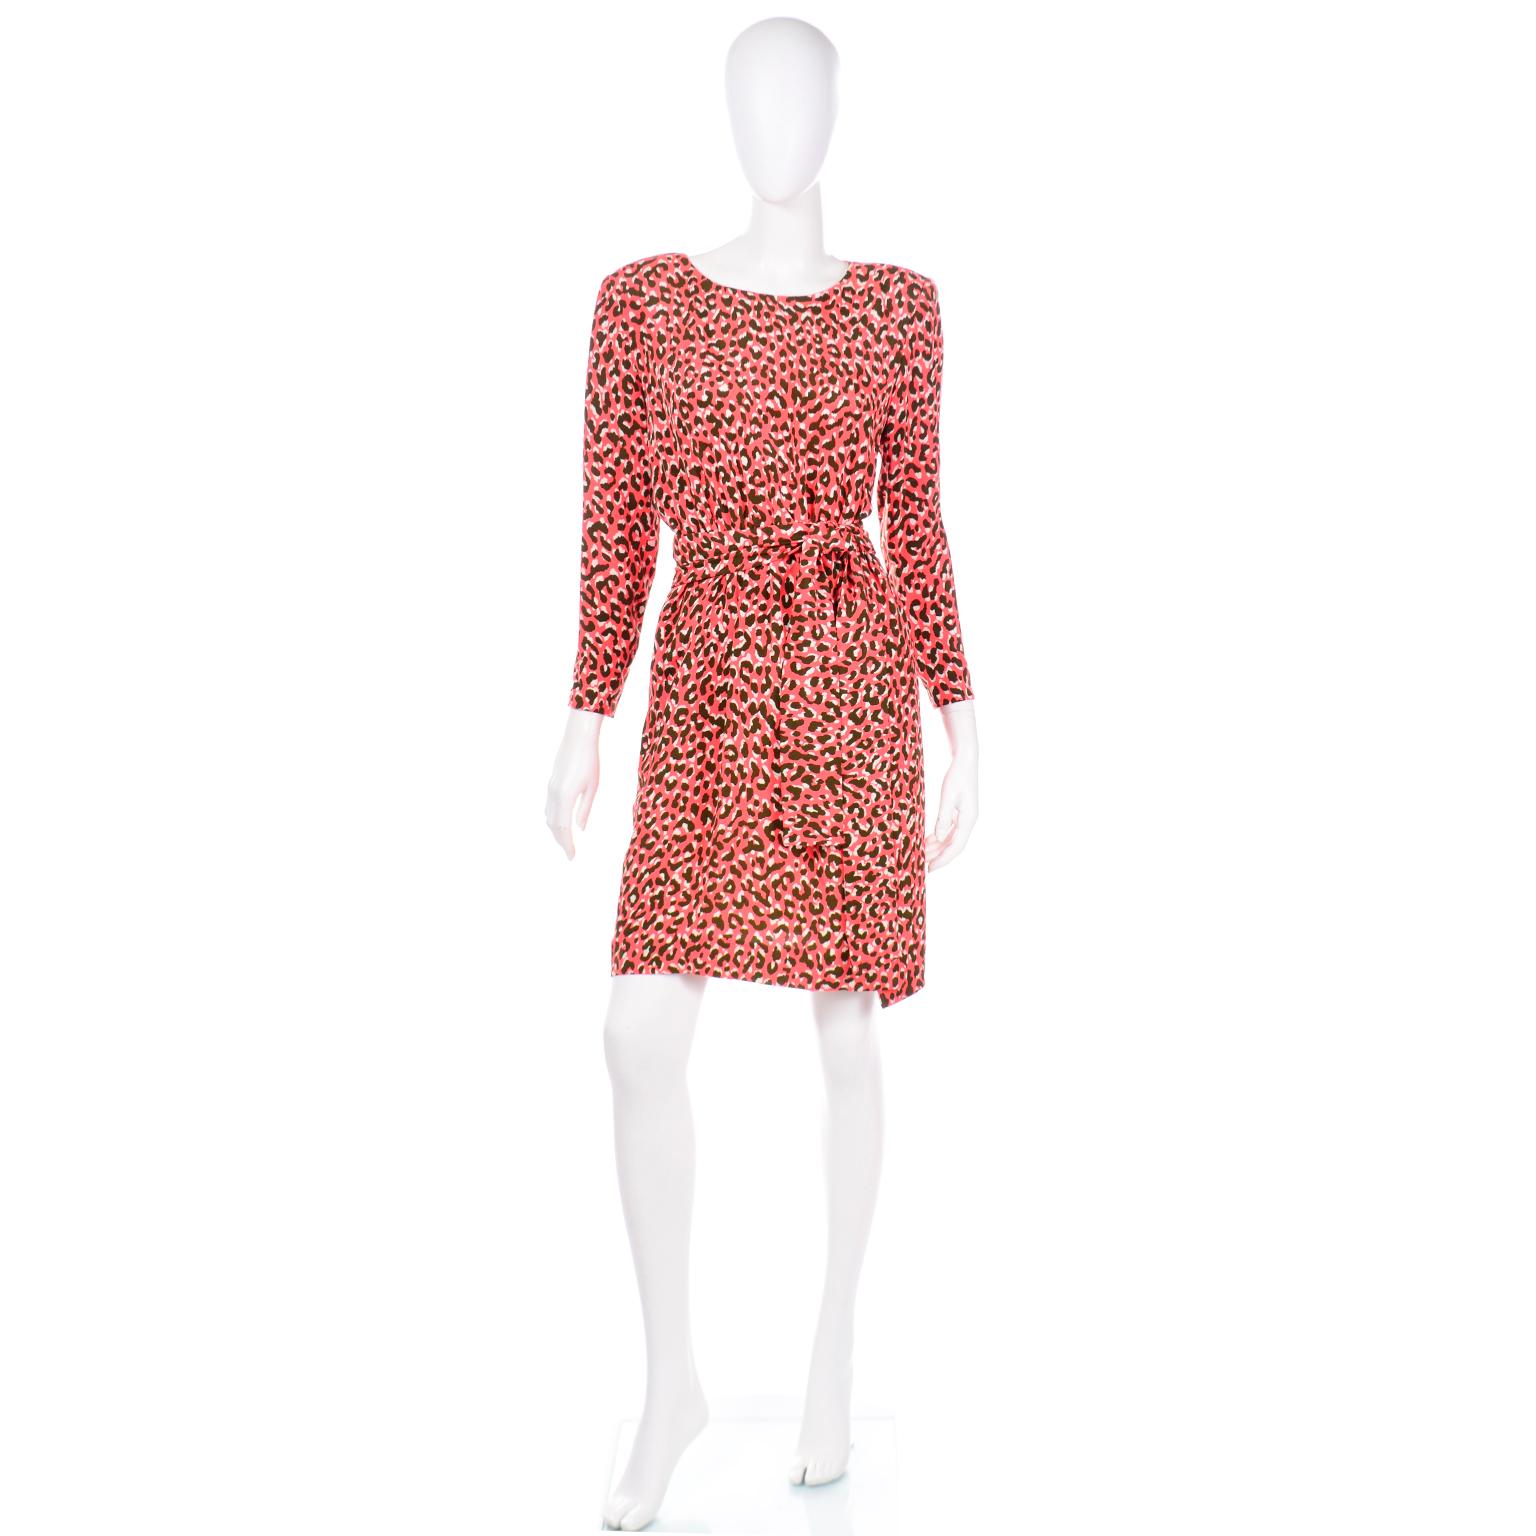 Yves Saint Laurent YSL Vintage 1989 Orange Animal Print Runway Dress With Sash In Excellent Condition For Sale In Portland, OR